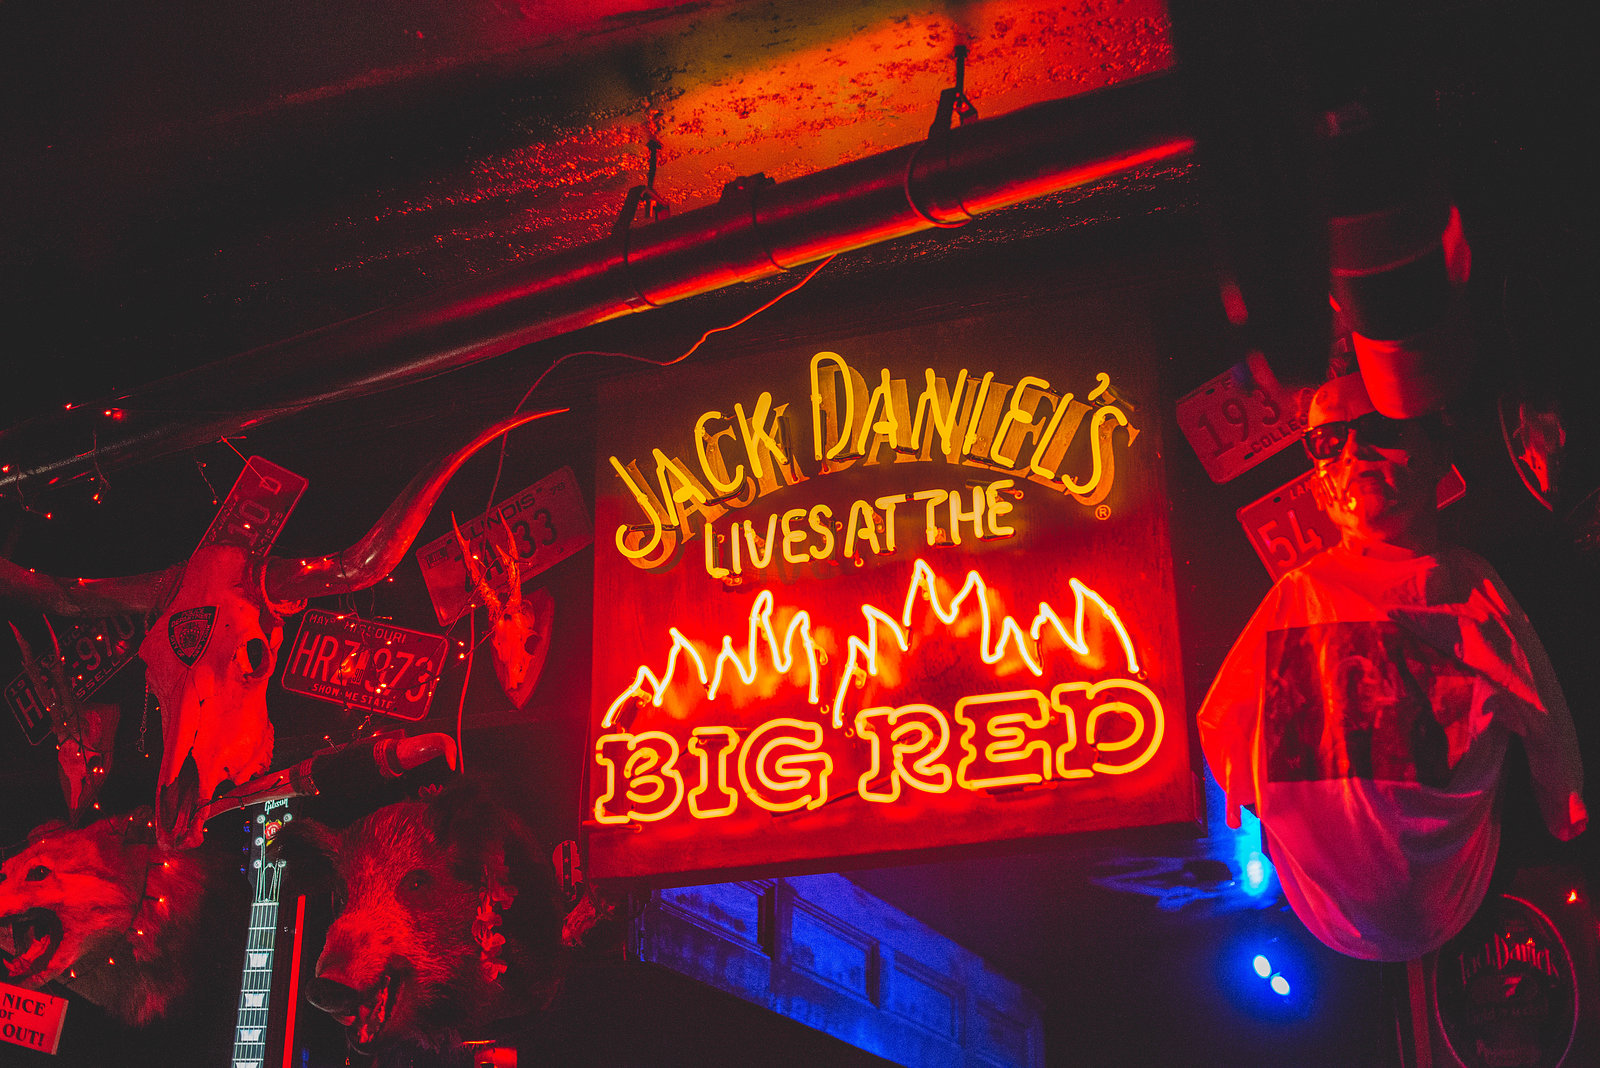 Skinny Molly at The Big Red, London, July 2018